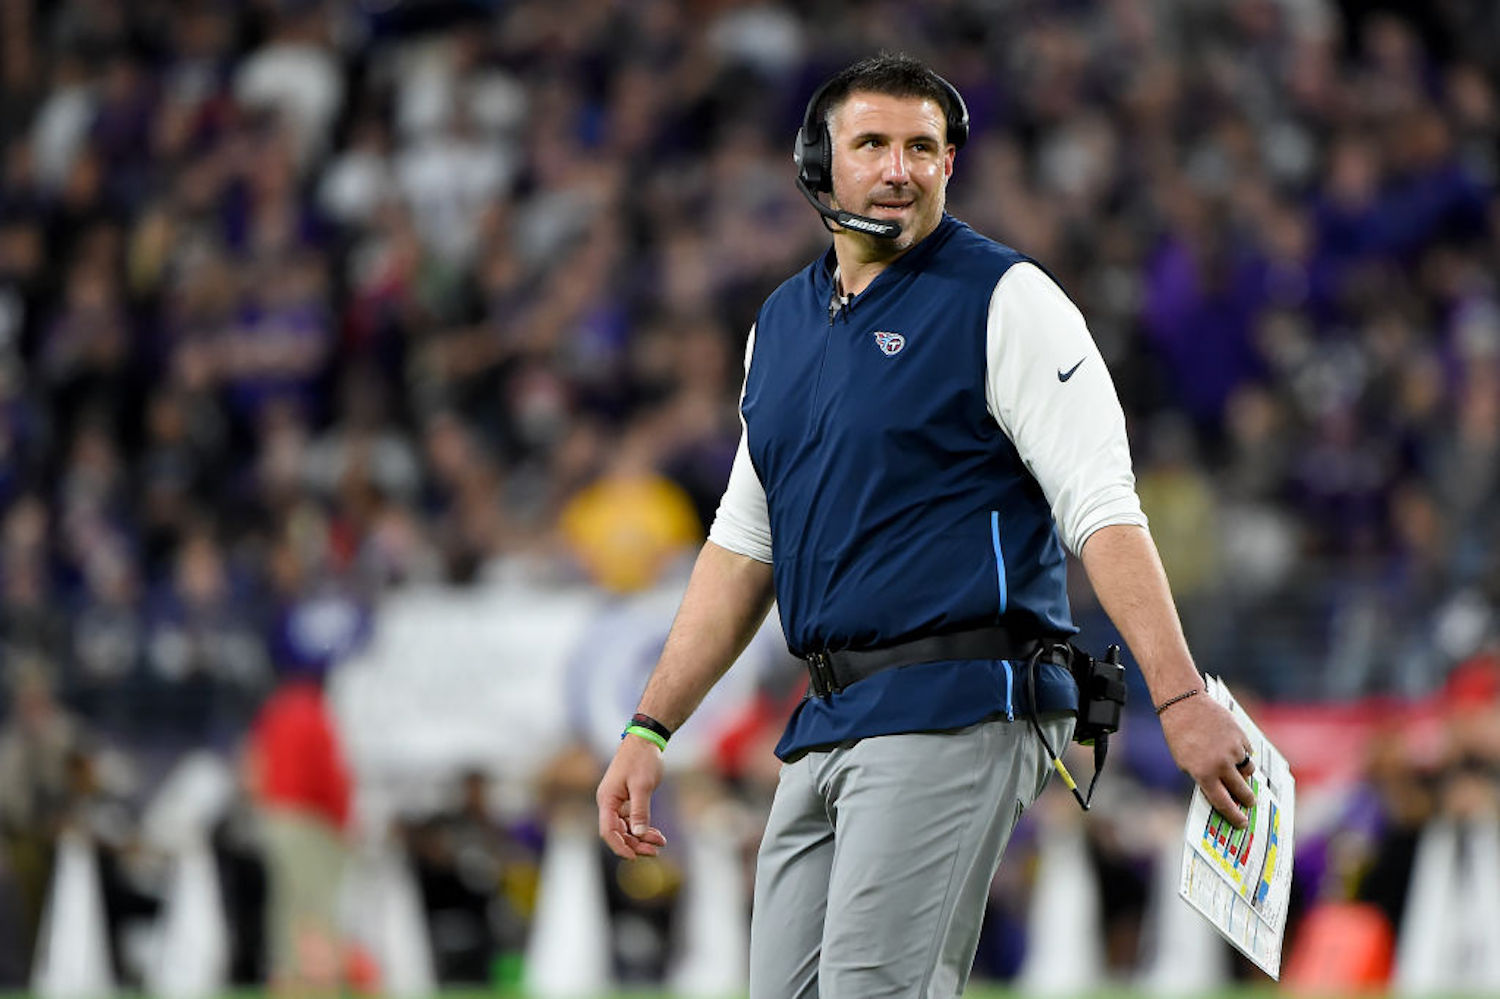 The Titans took a penalty late in the fourth quarter to give the Texans a first down, but it was all according to Mike Vrabel's master plan.